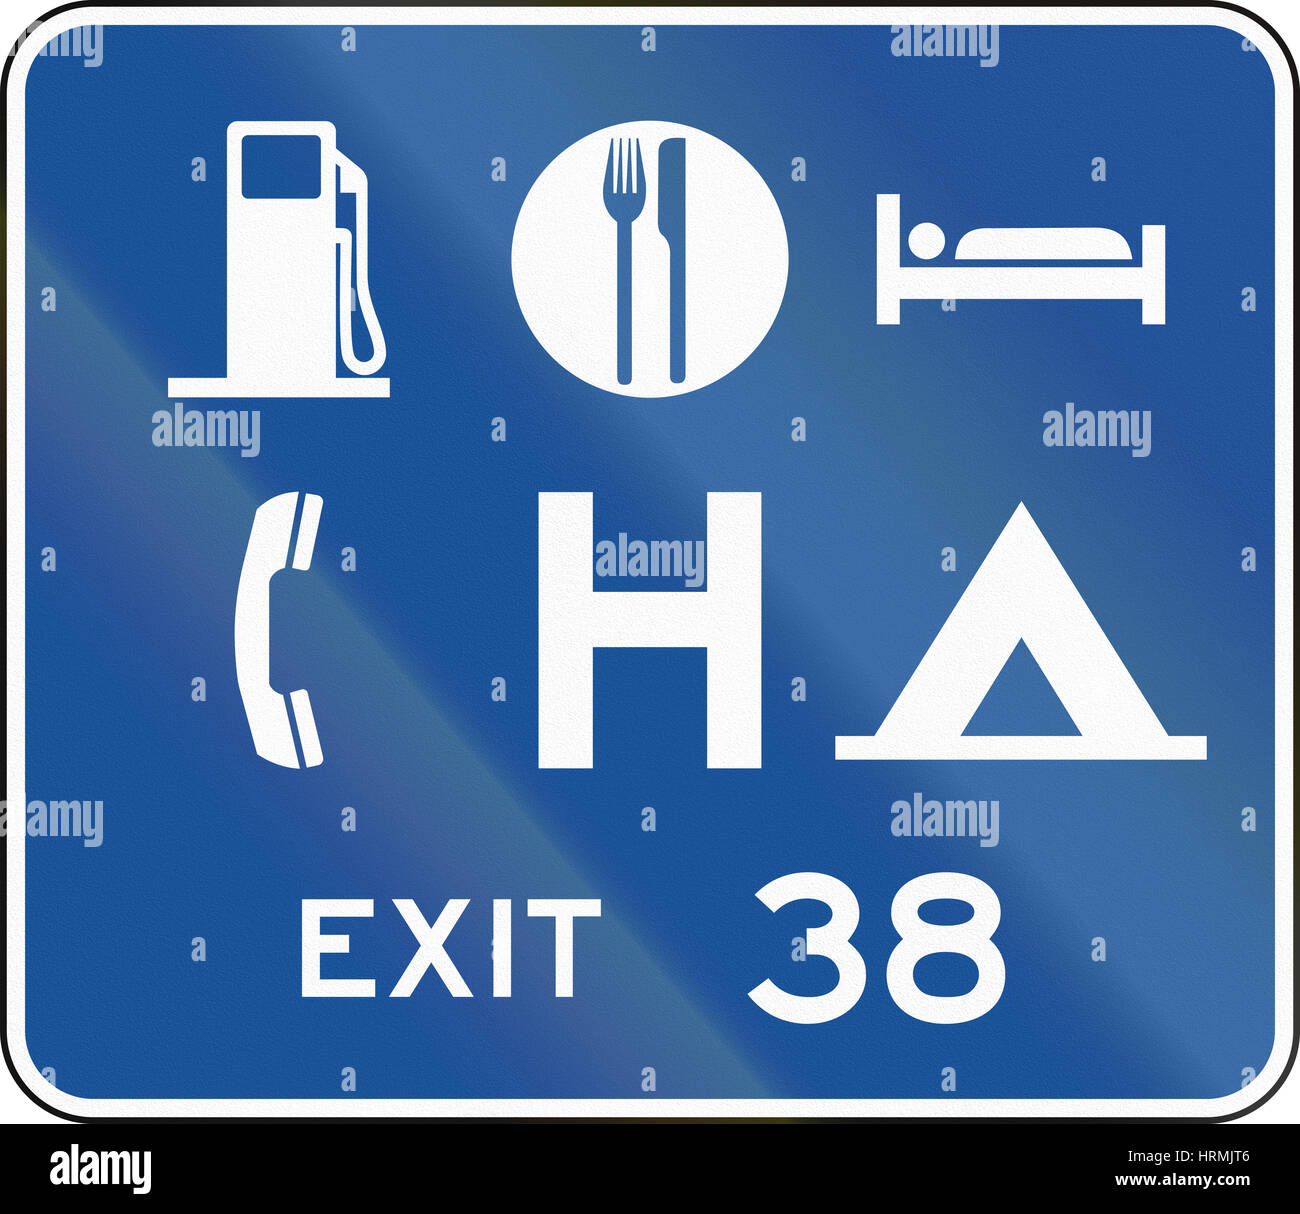 United States MUTCD guide road sign - Services. Stock Photo